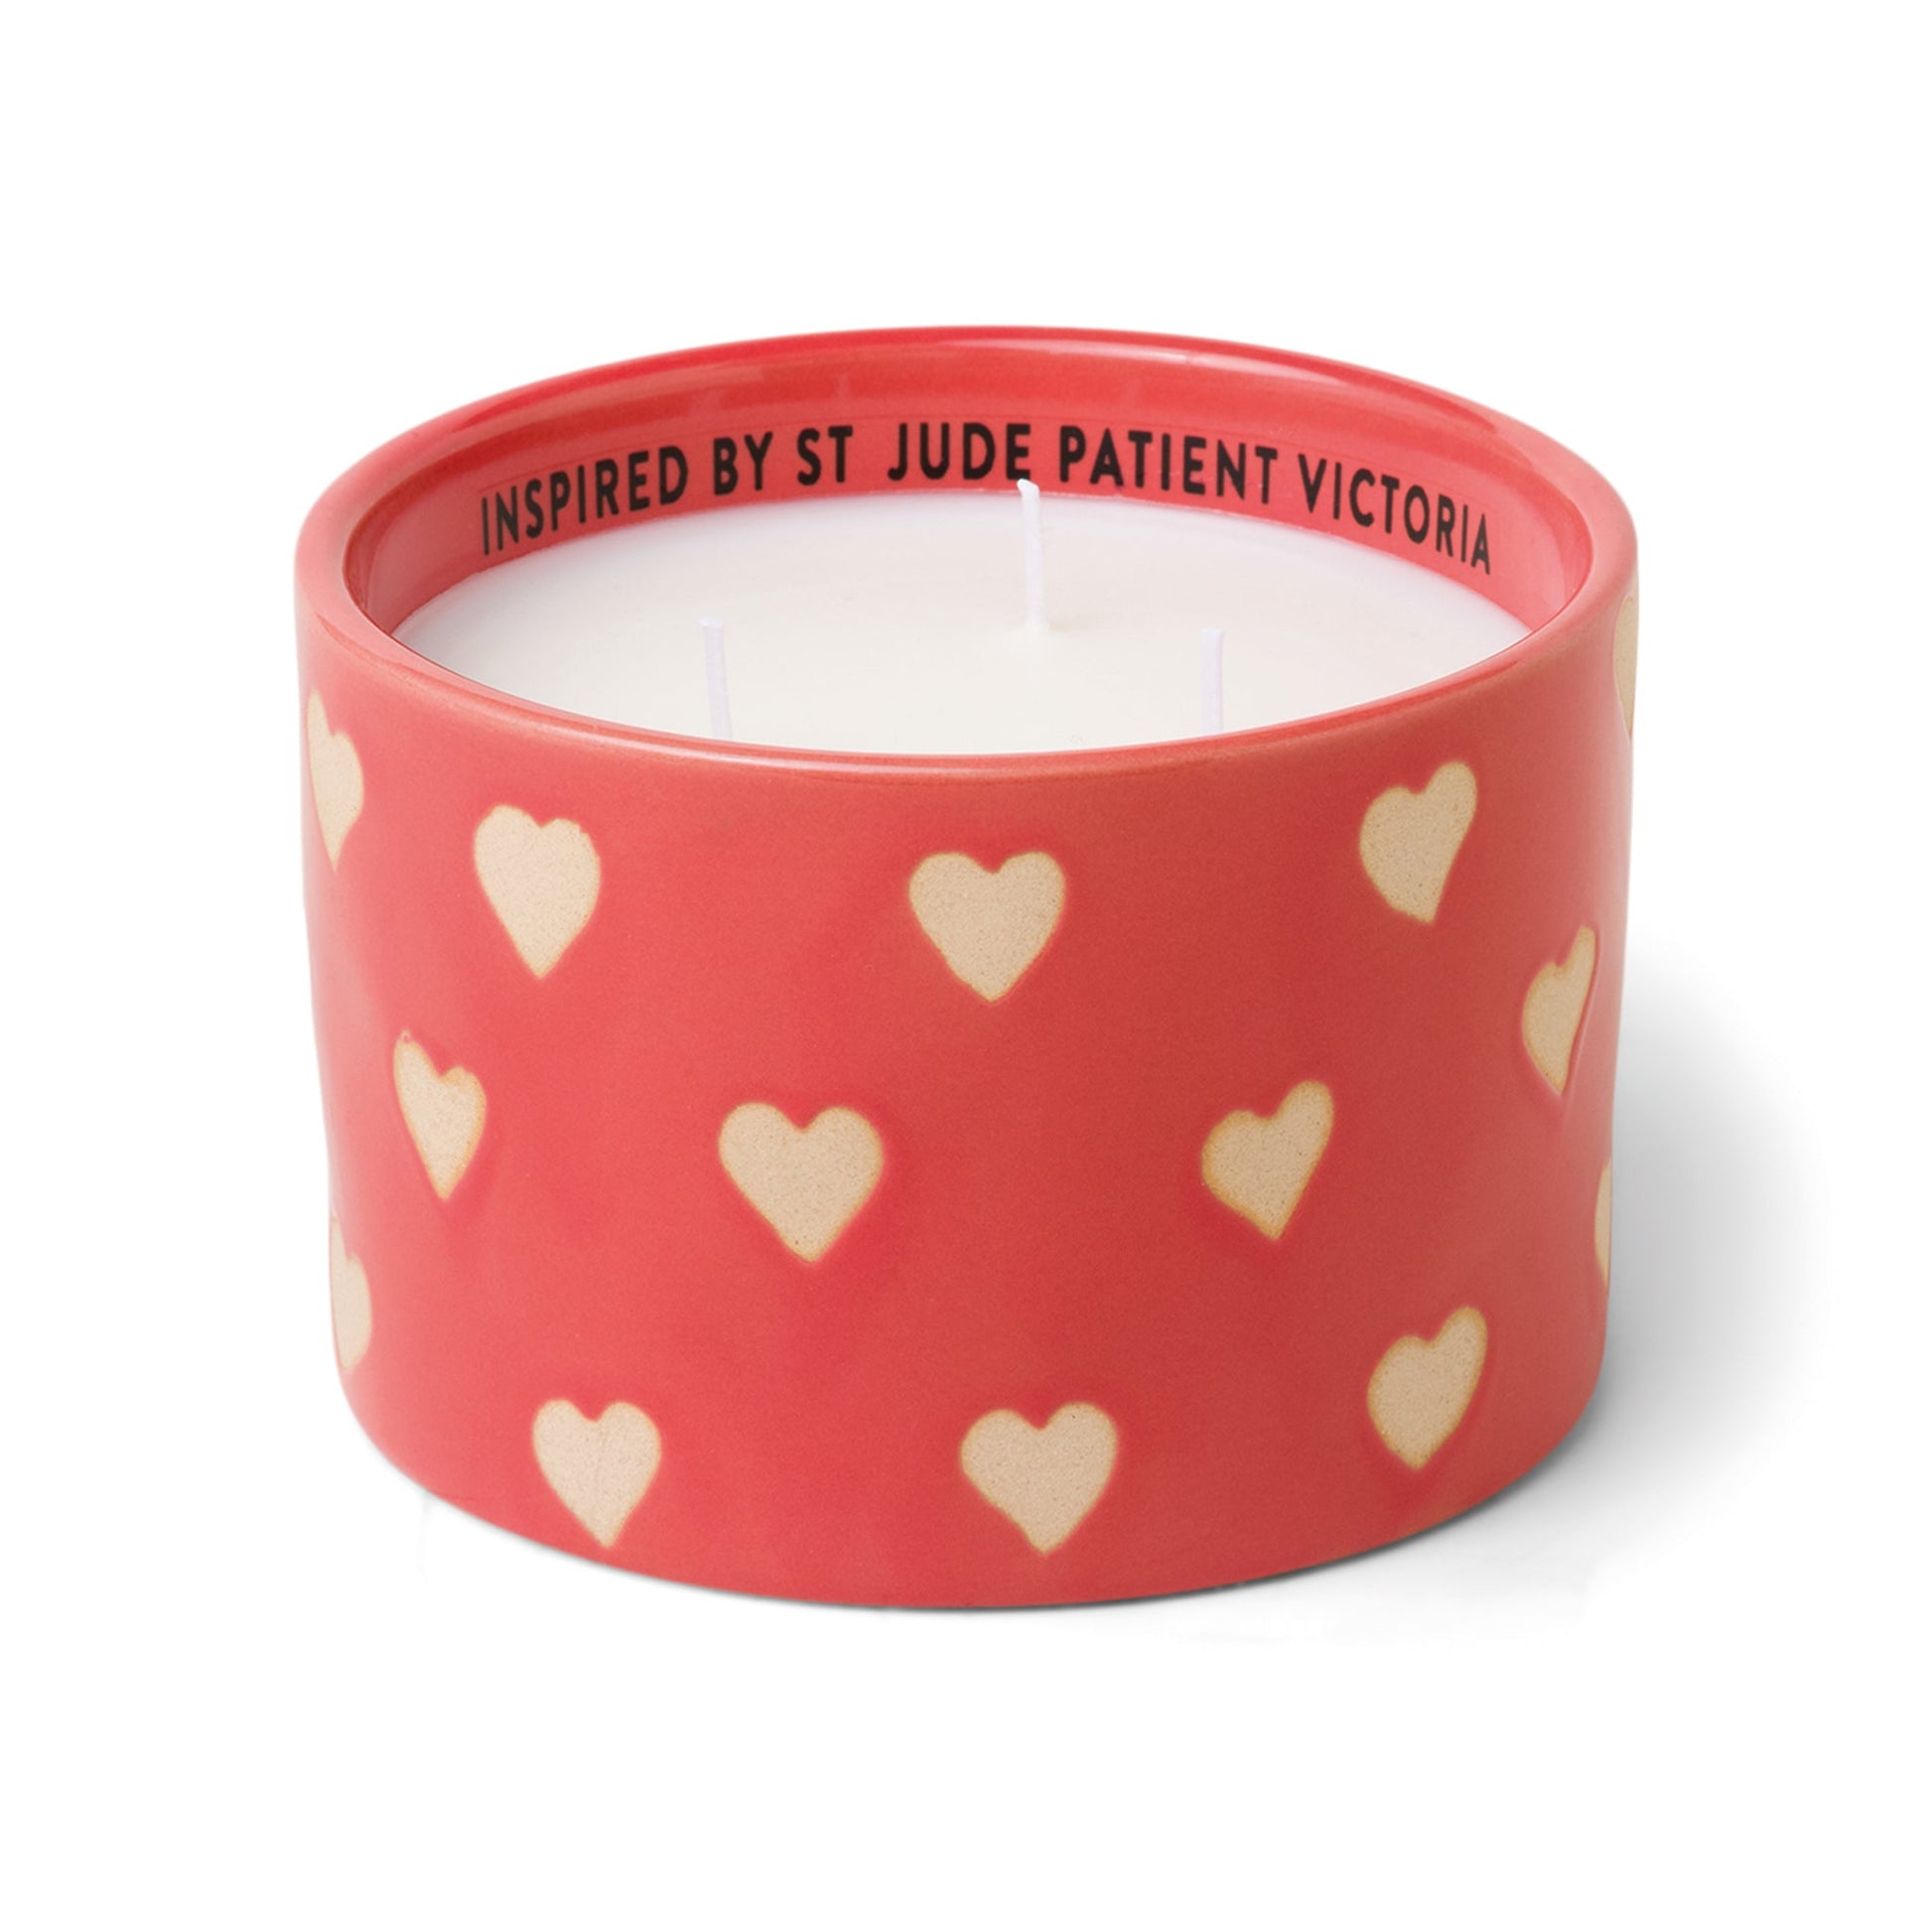 Red ceramic candle with hearts and white soy wax center with three wicks. Debossed name on back side of the label with text "Inspired by St. Jude patient Victoria". Scented candle on white background